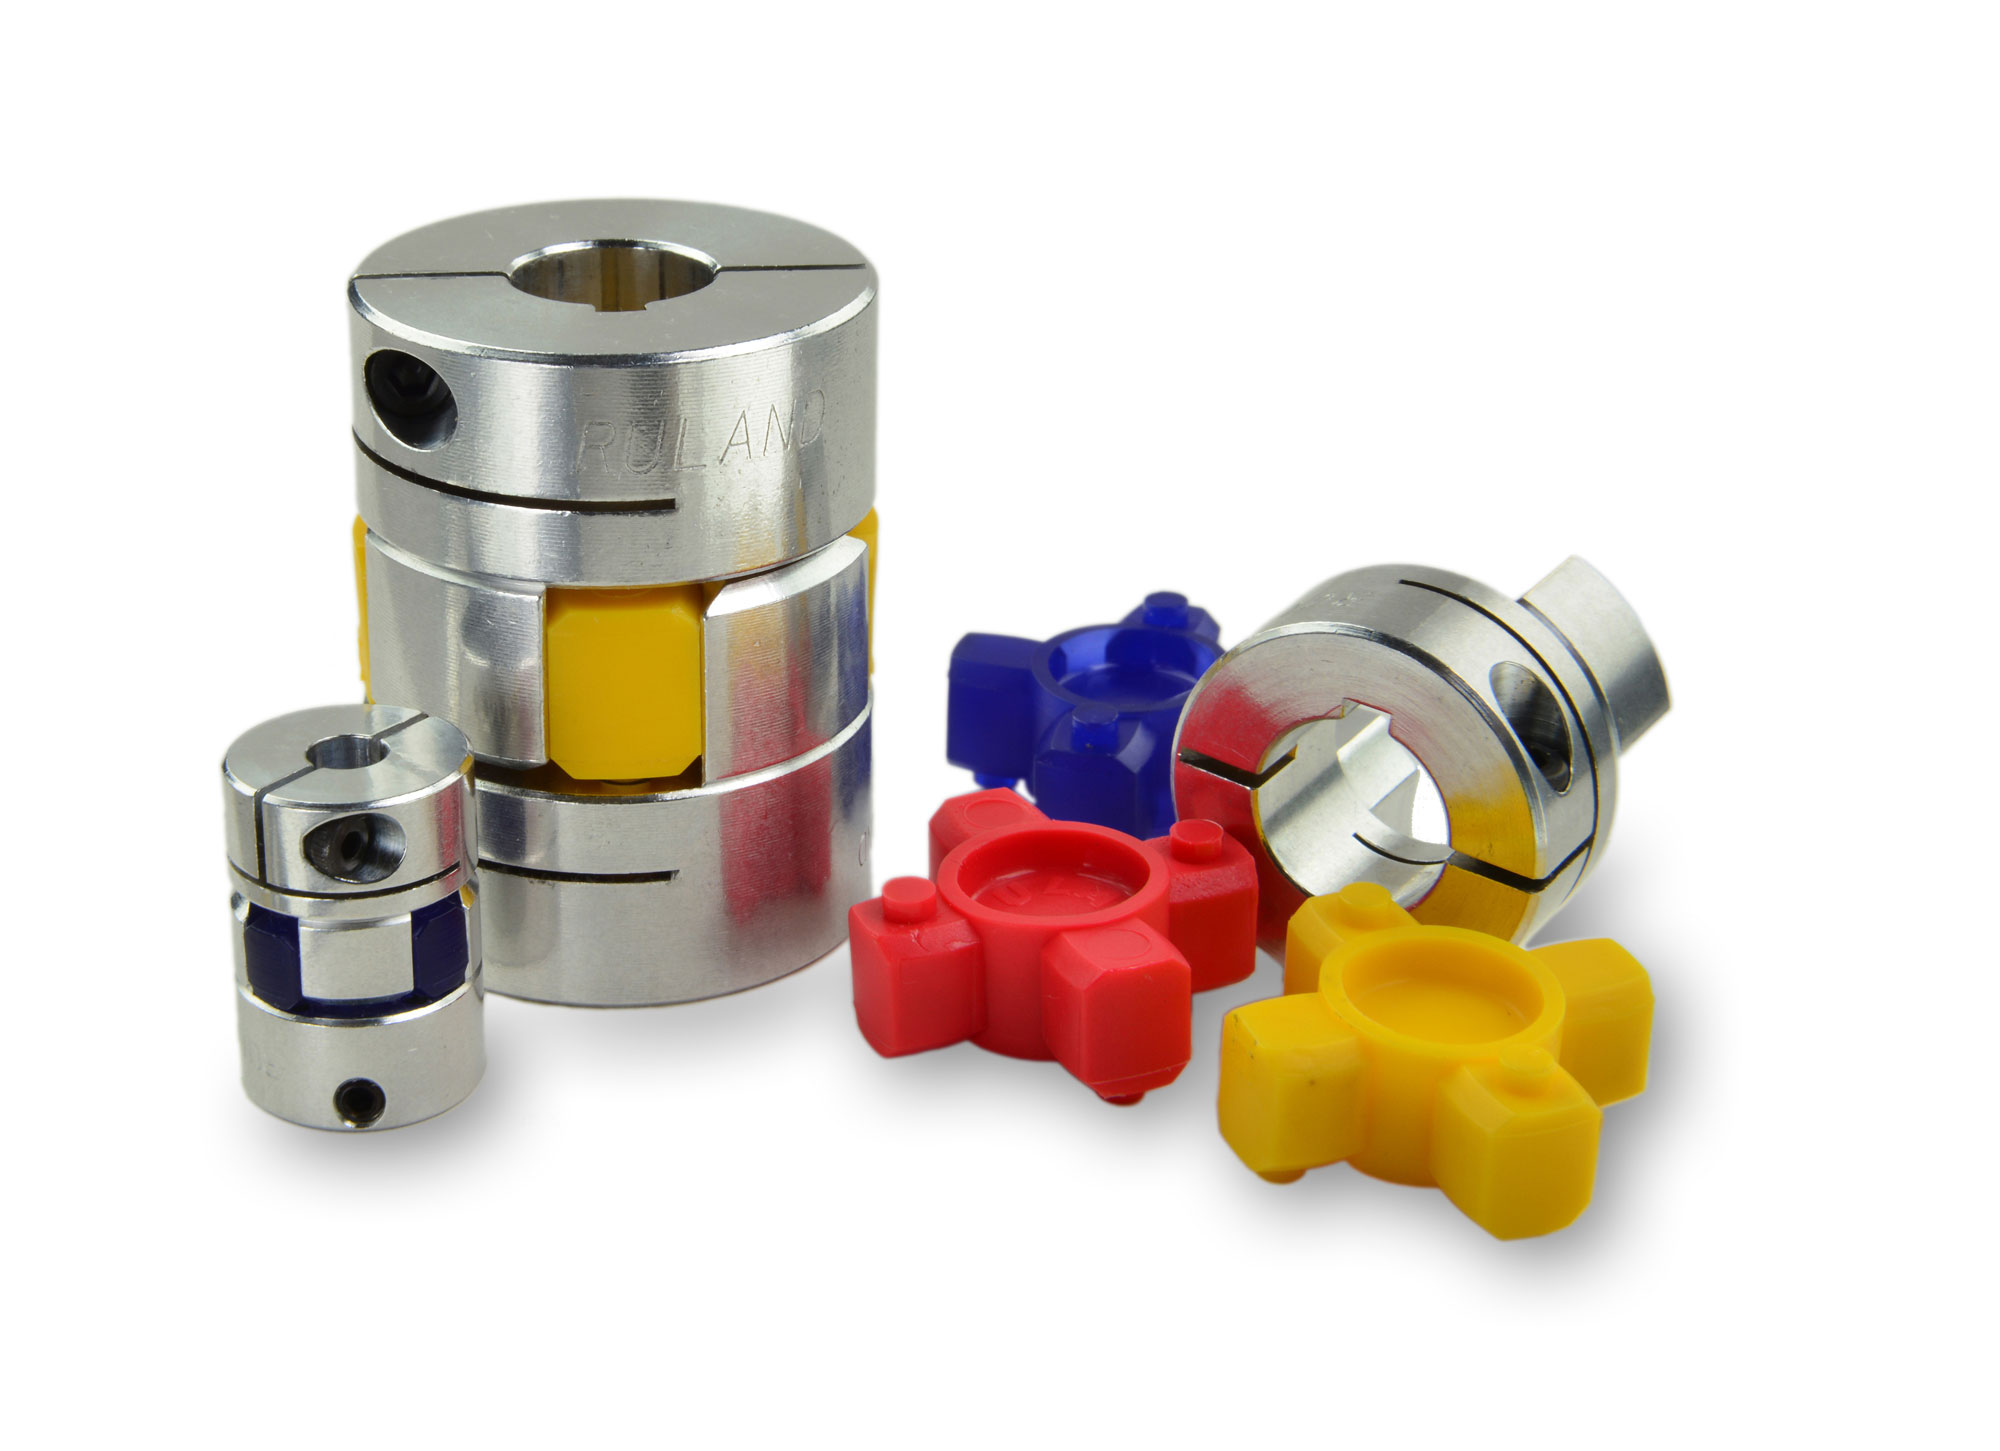 Jaw couplings from Ruland in different sizes with spiders available in three durometers